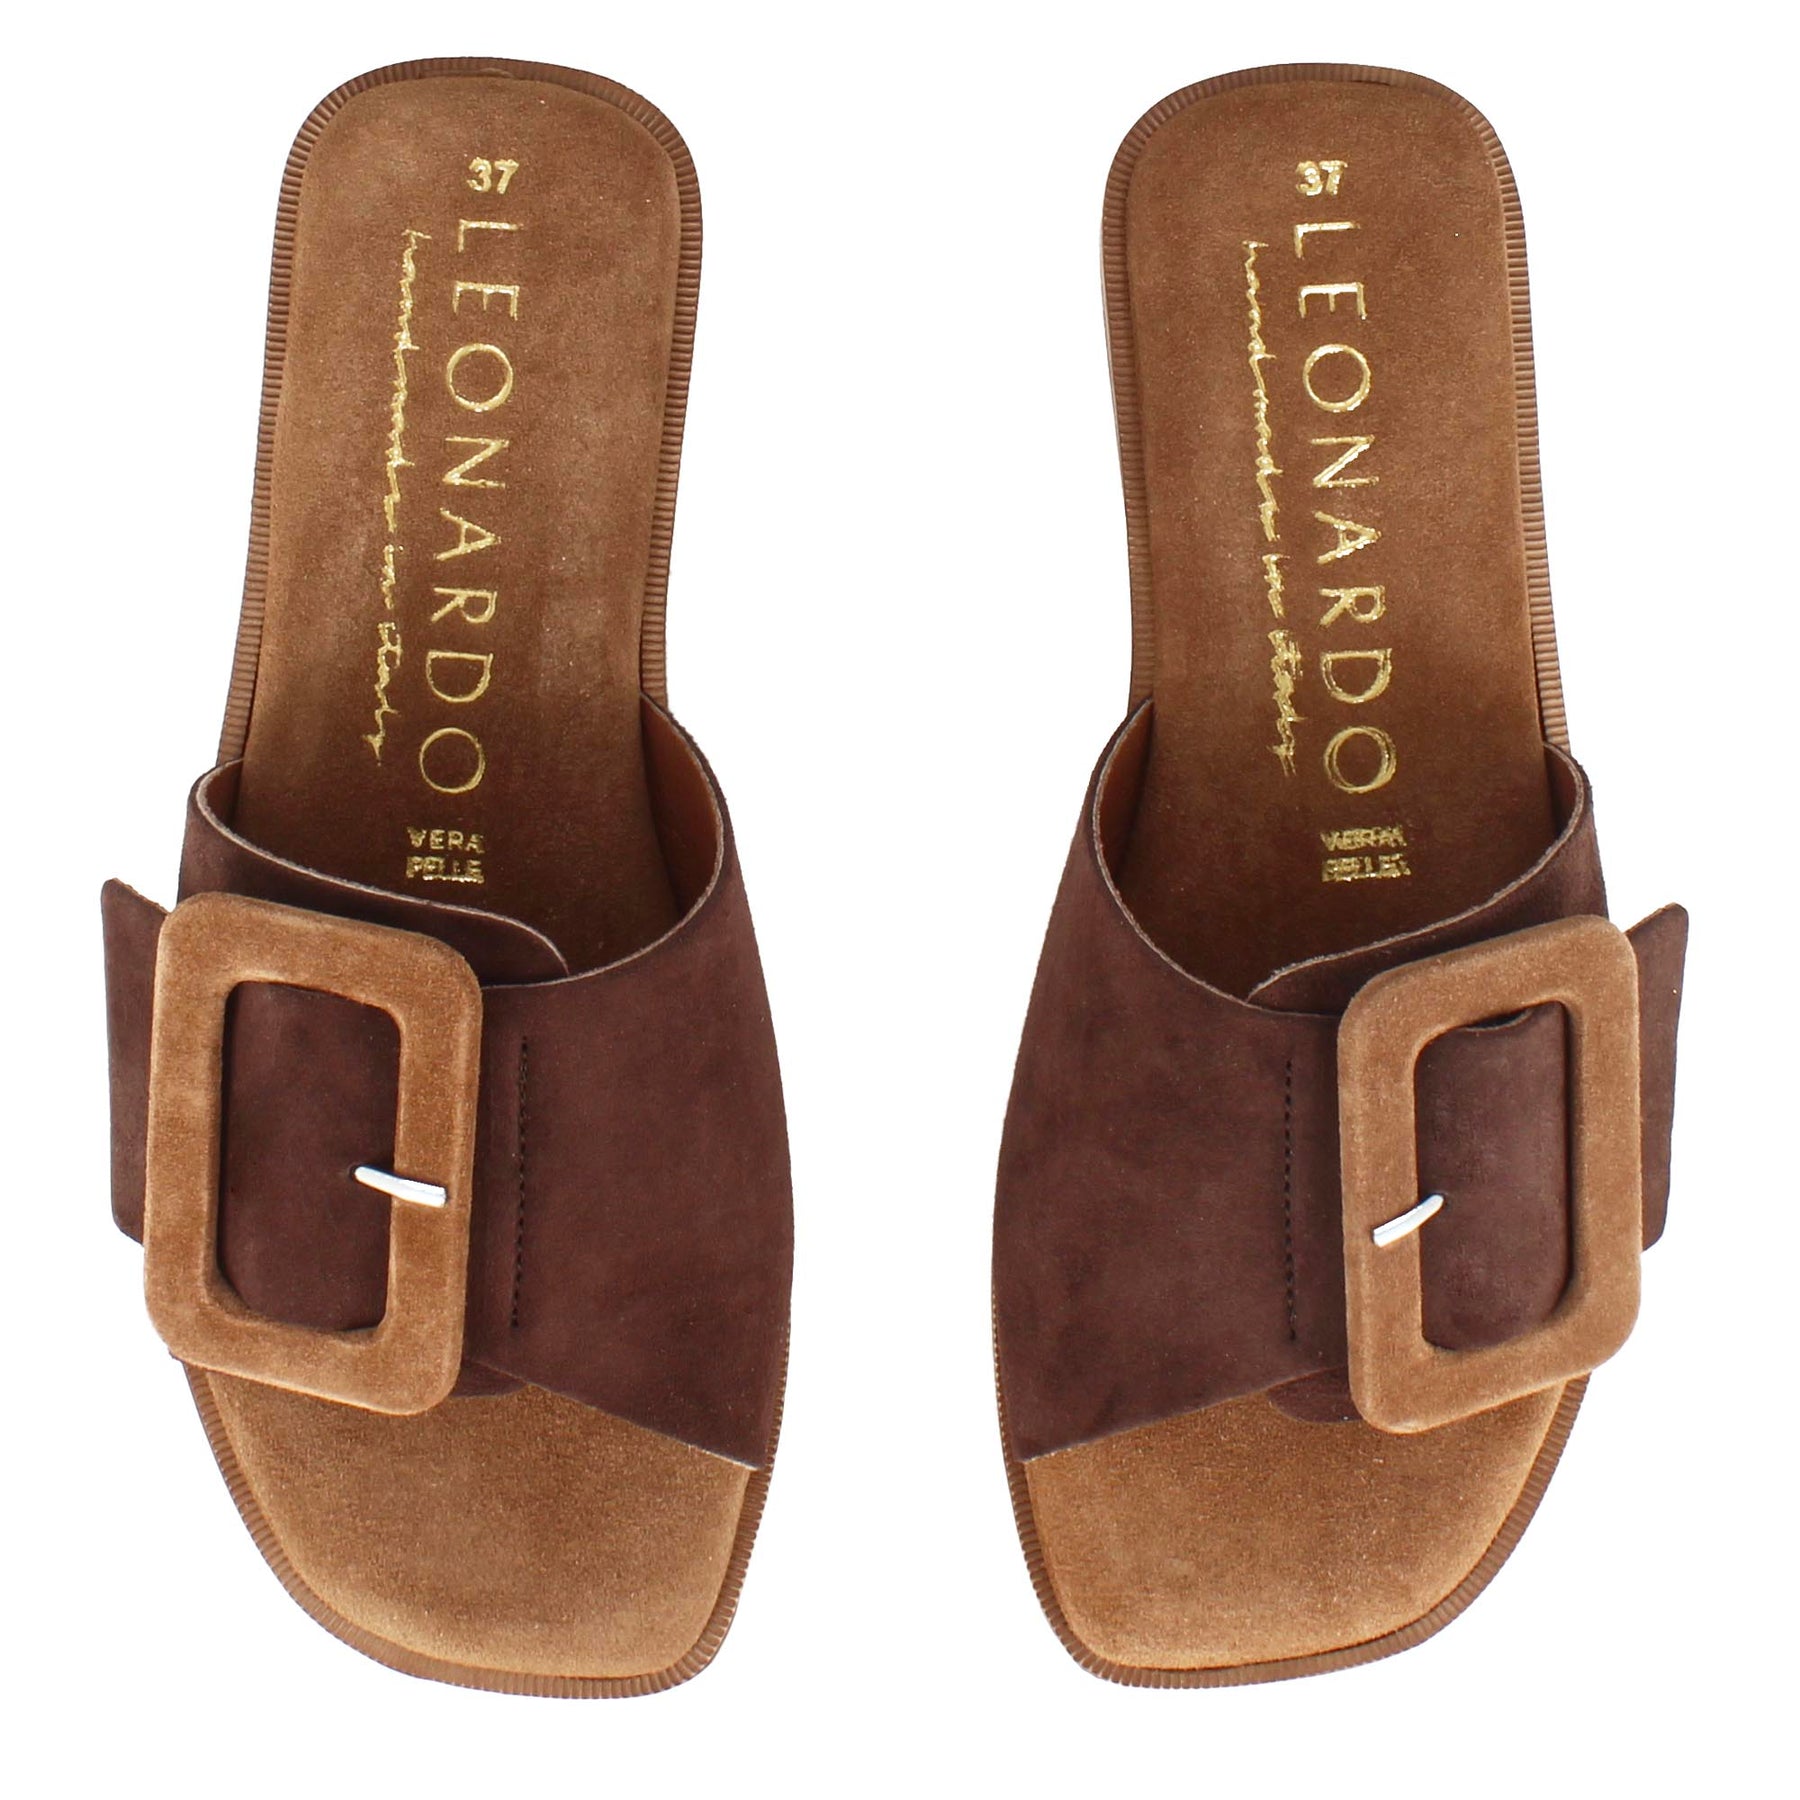 Light brown and dark brown suede women's slippers